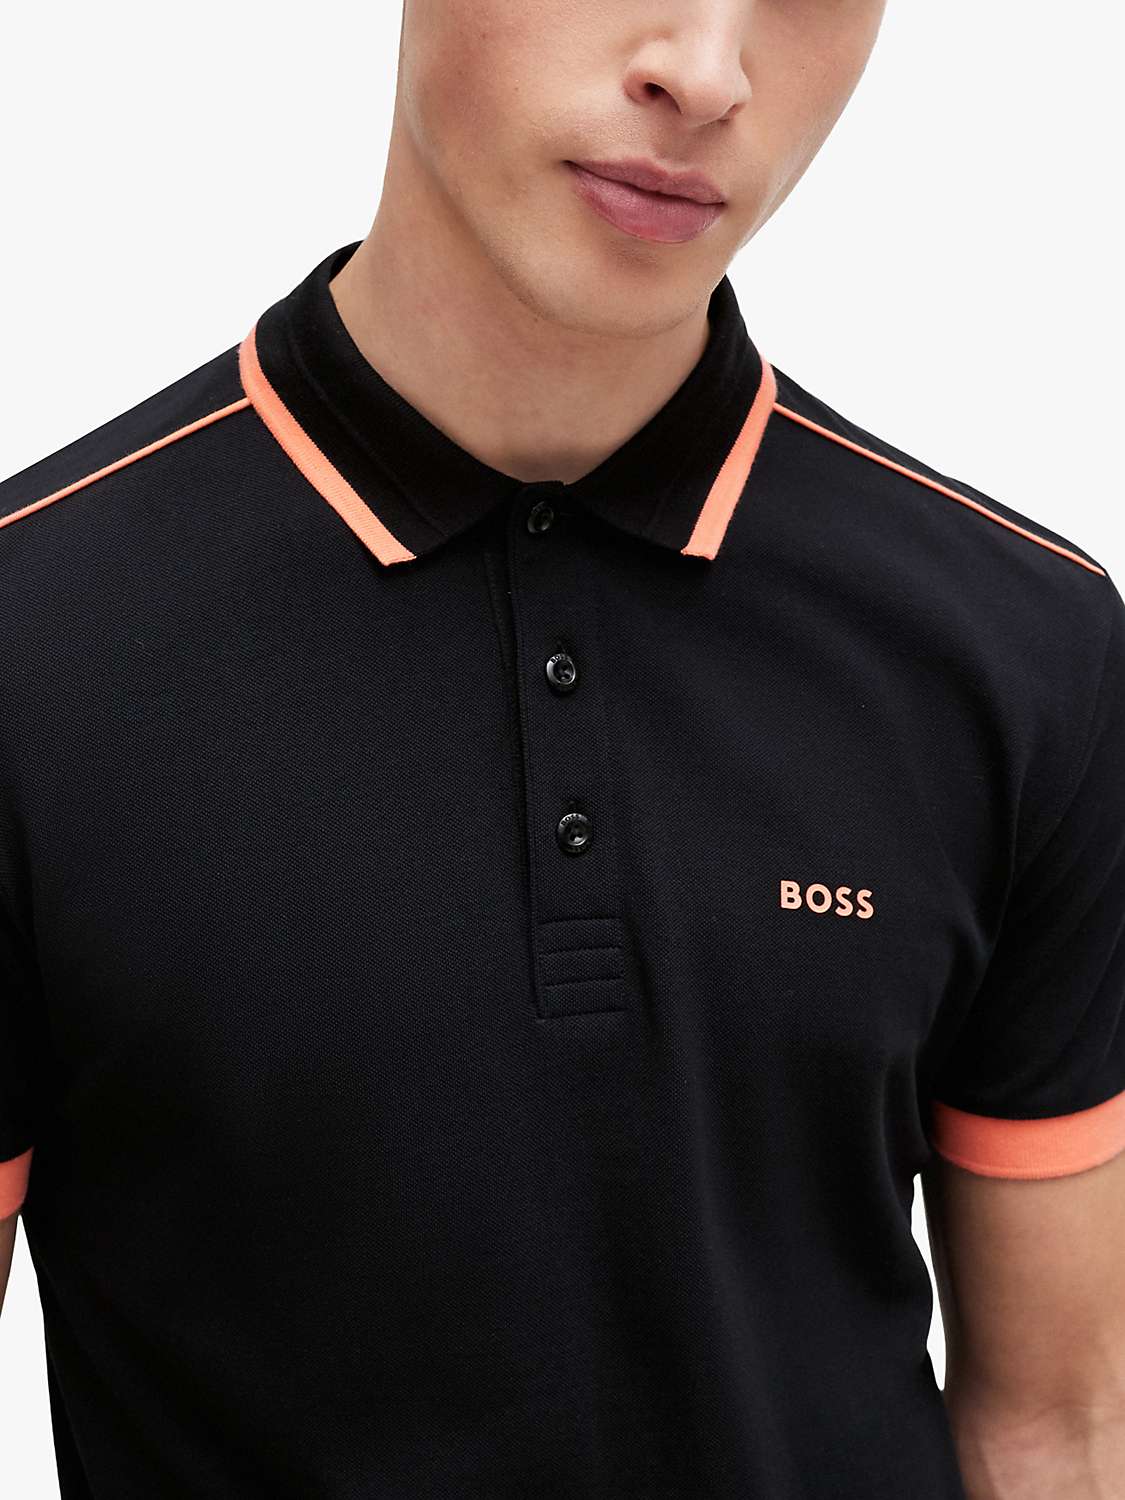 Buy BOSS Paddy Sporty Polo Shirt, Black Online at johnlewis.com